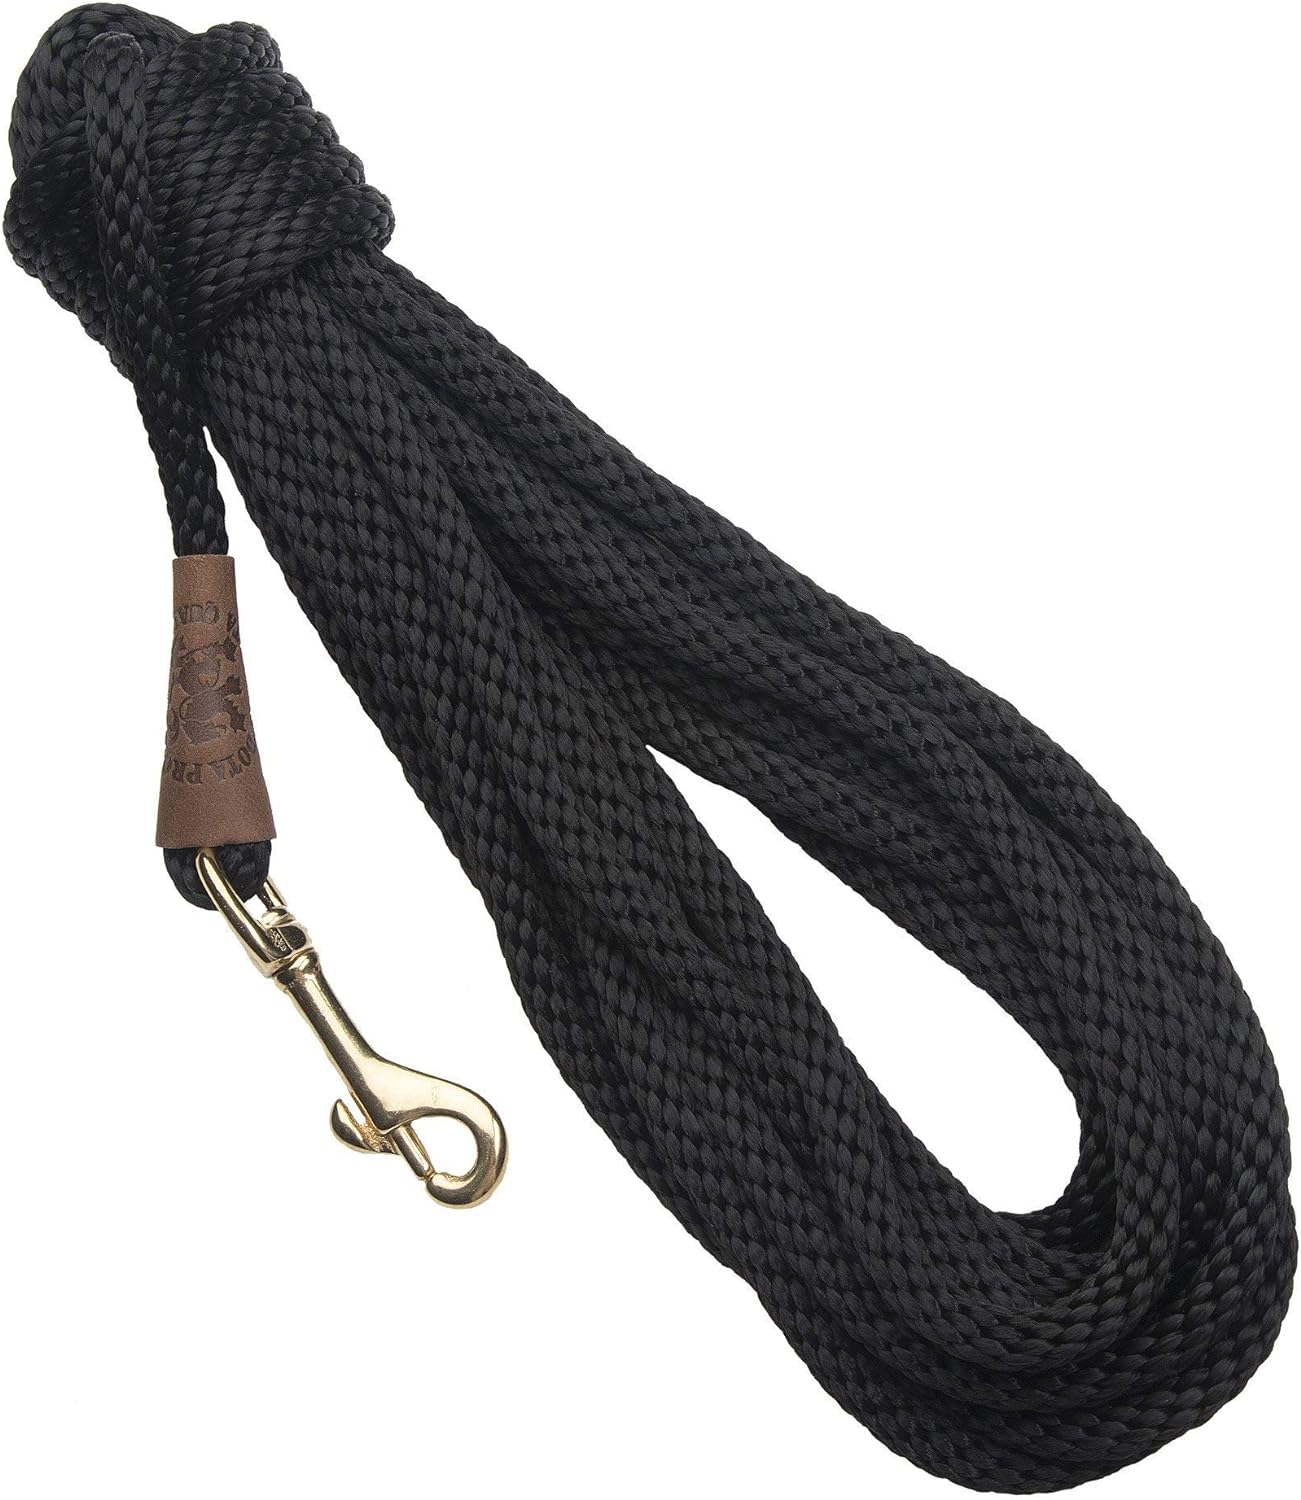 You are currently viewing Mendota Obedience 20 Check Cord Dog Lead Review